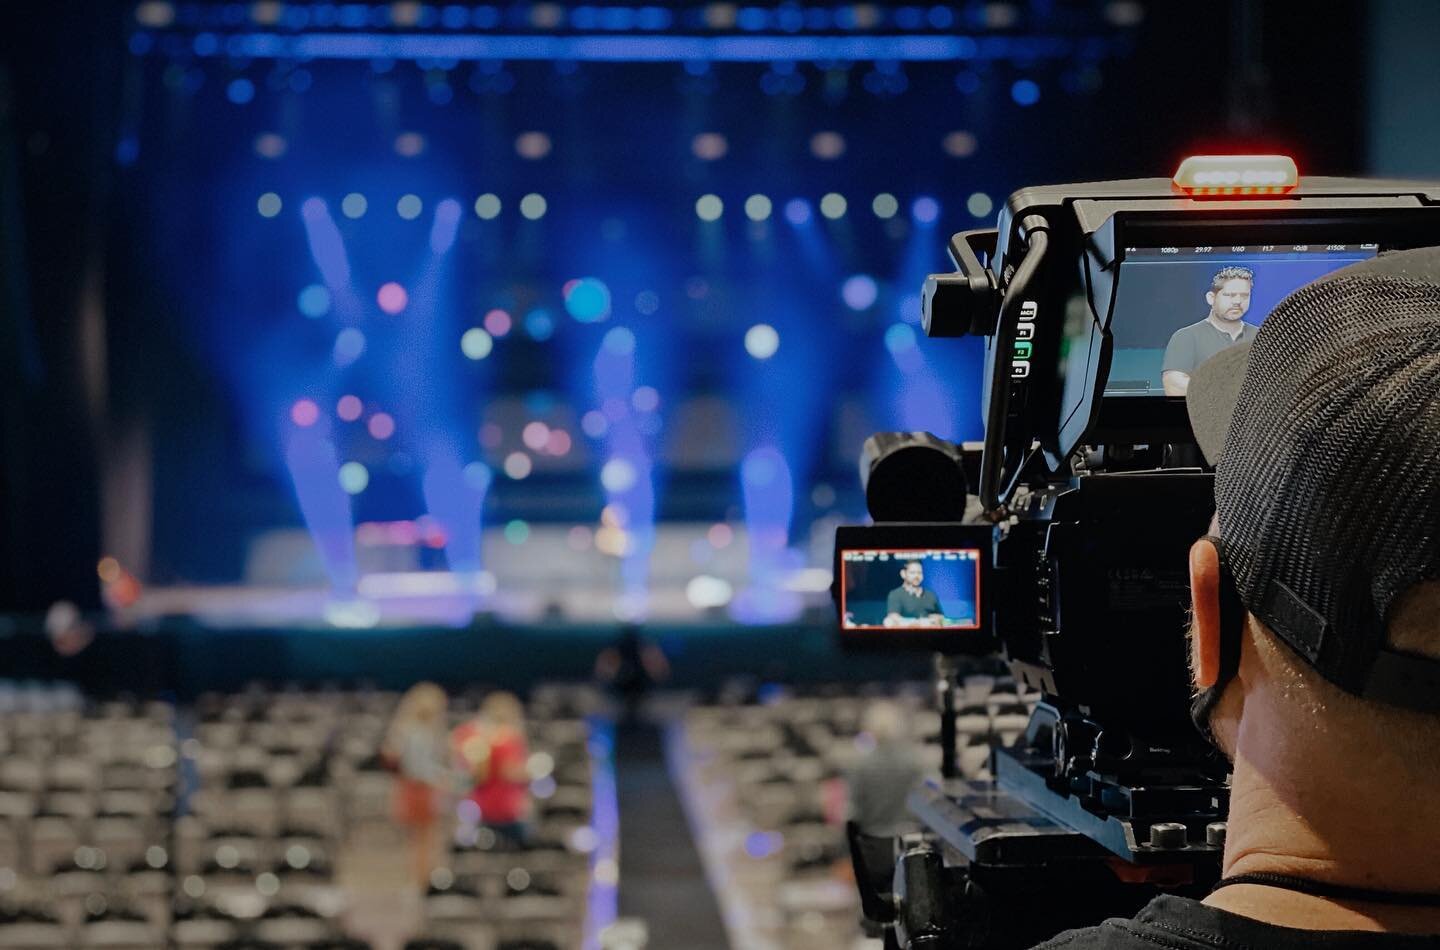 Did you know we do full television production? 📺 Click the link in our bio and check out our website for more info and bookings!